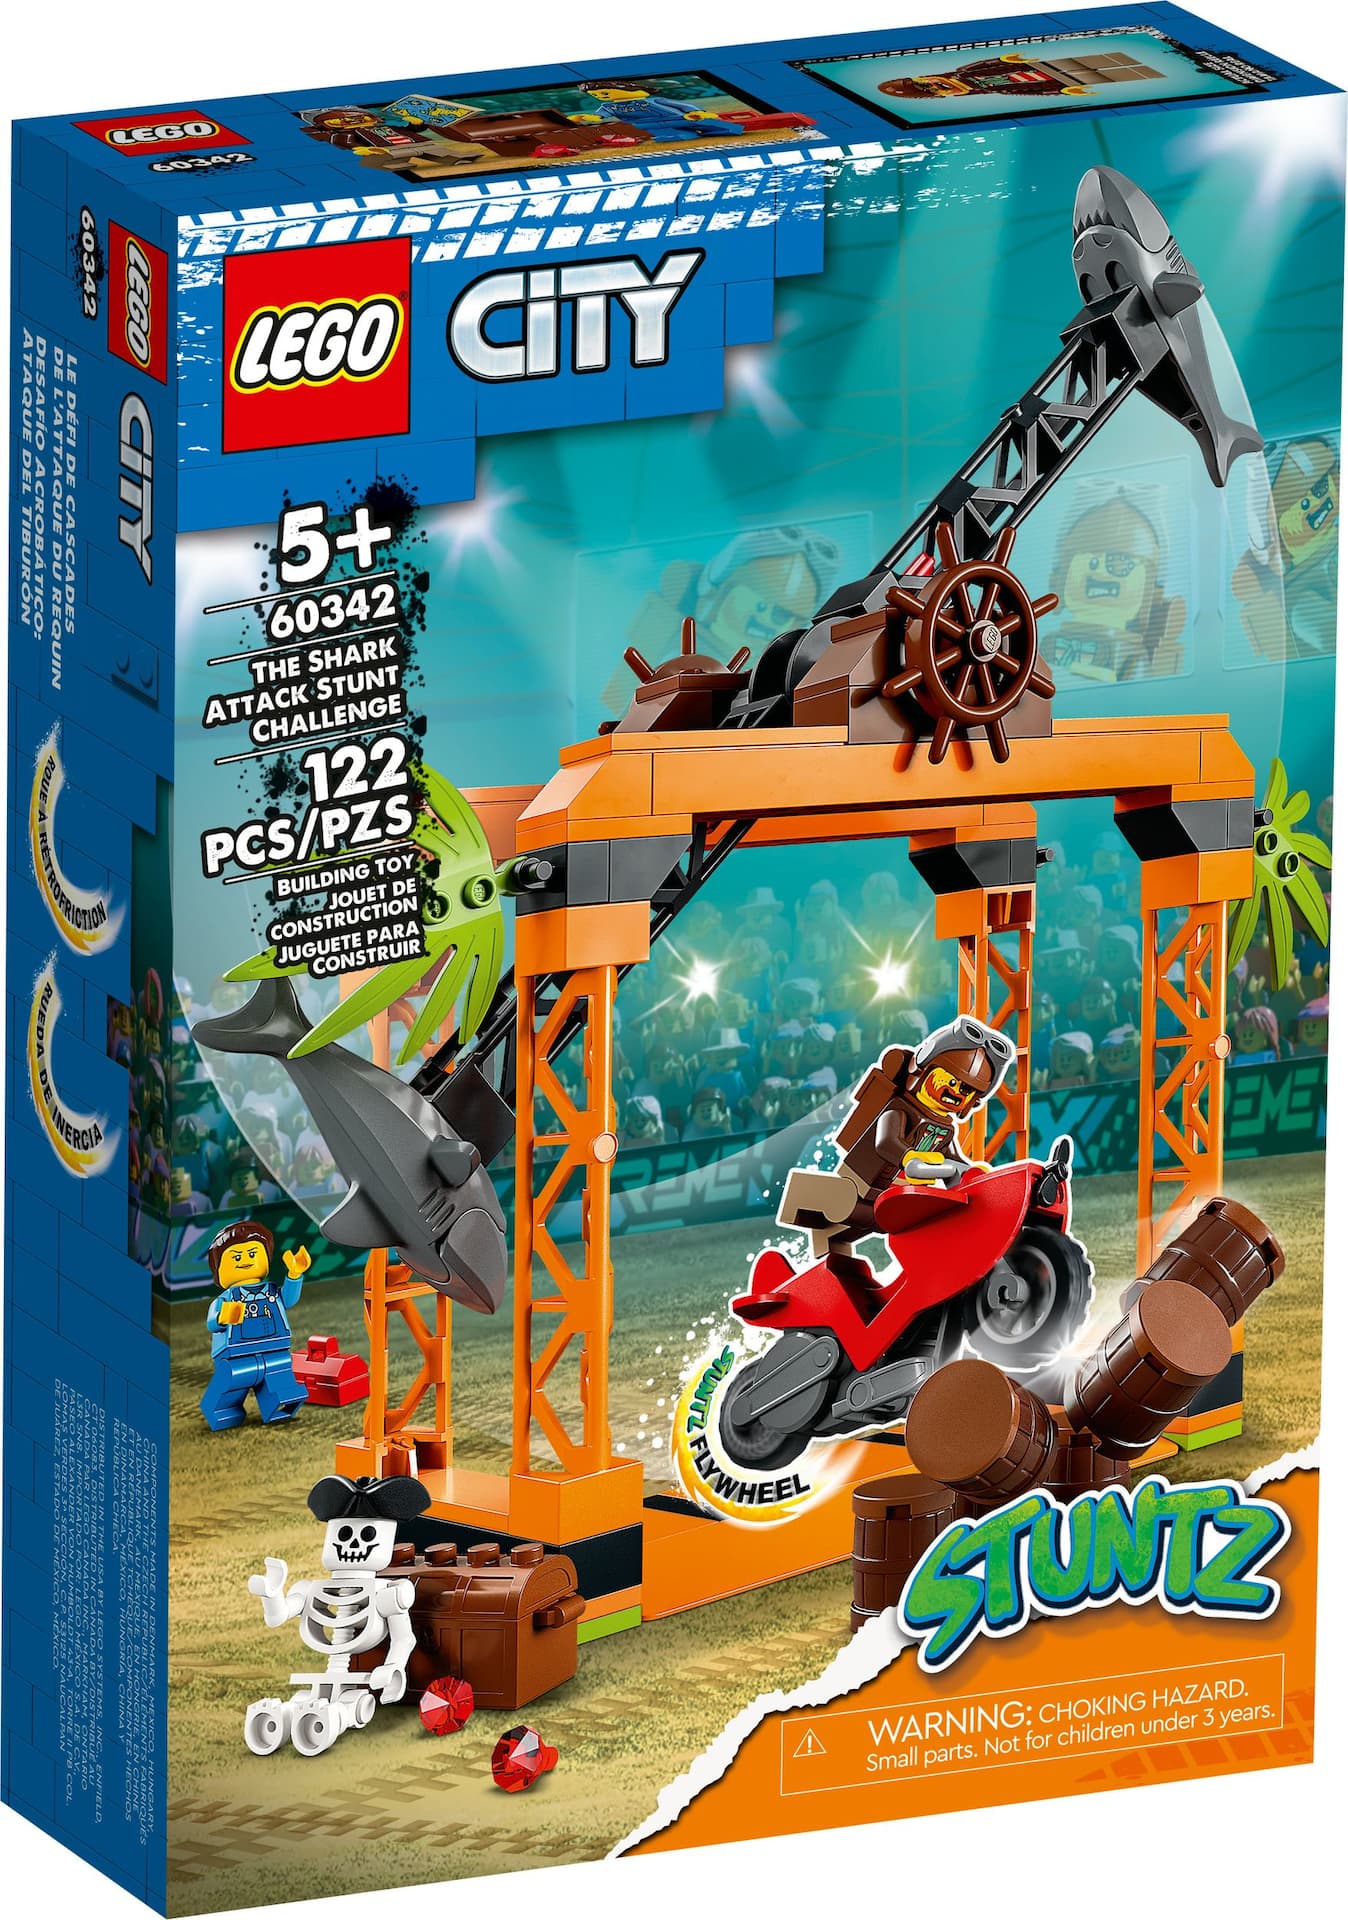 LEGO® 60342 City The Shark Attack Stunt Challenge Playset, Ages 5+